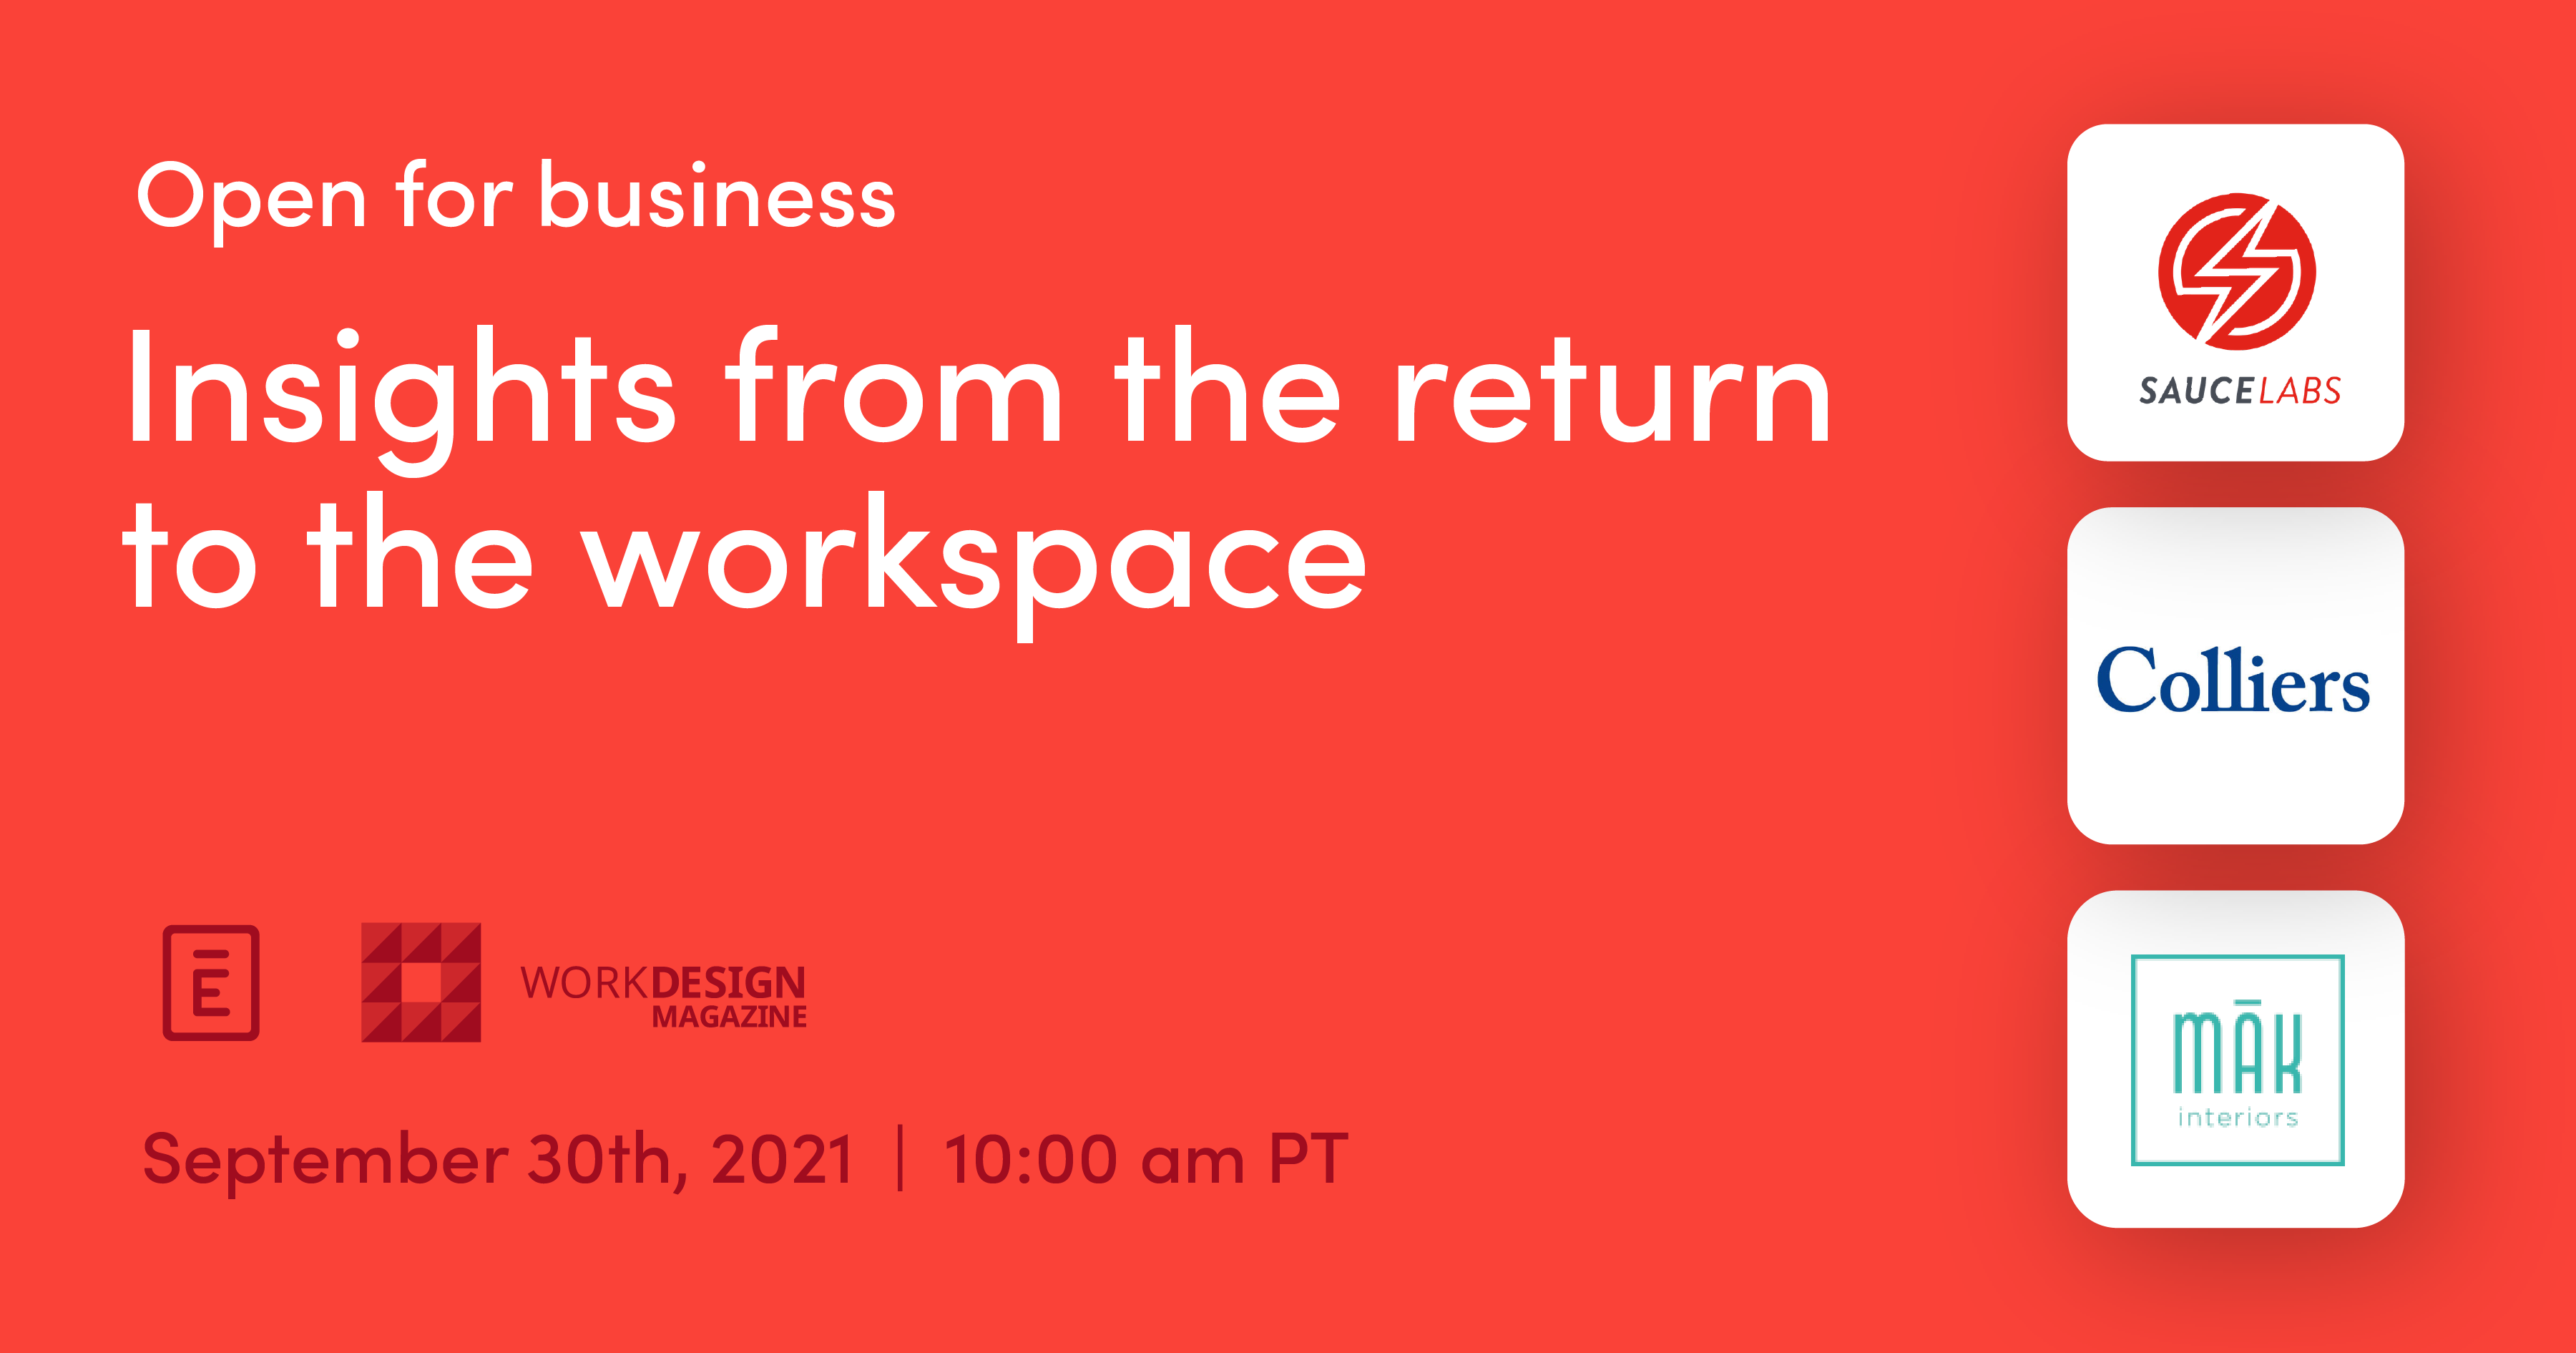 Live Webinar – Open for business: Insights from the return to the workspace